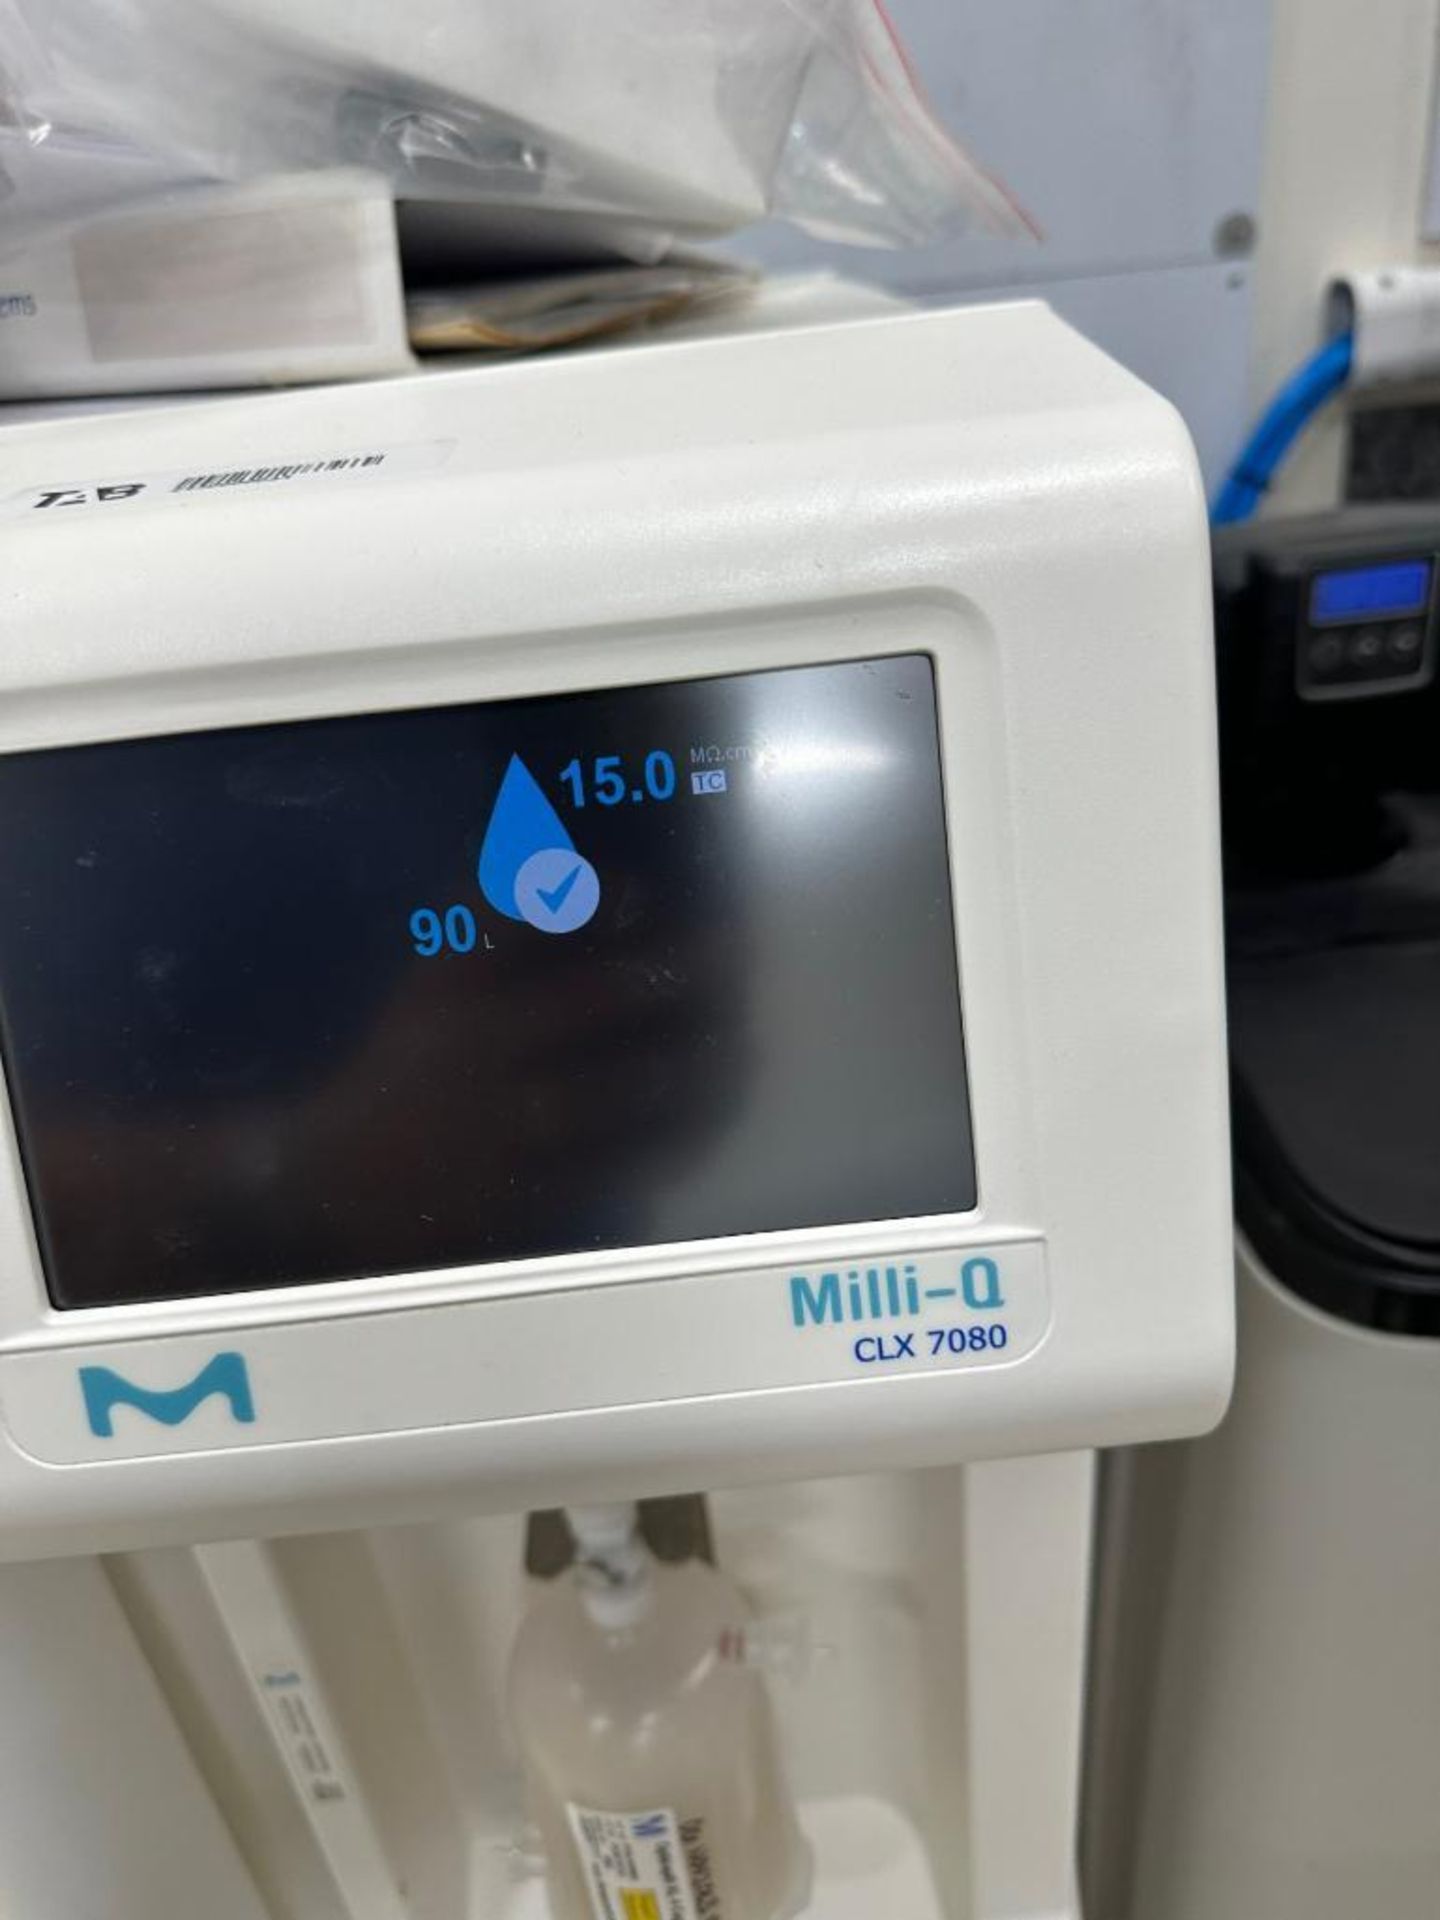 MILLIPORE MILLI-Q WATER FILTRATION SYSTEM - Image 2 of 3